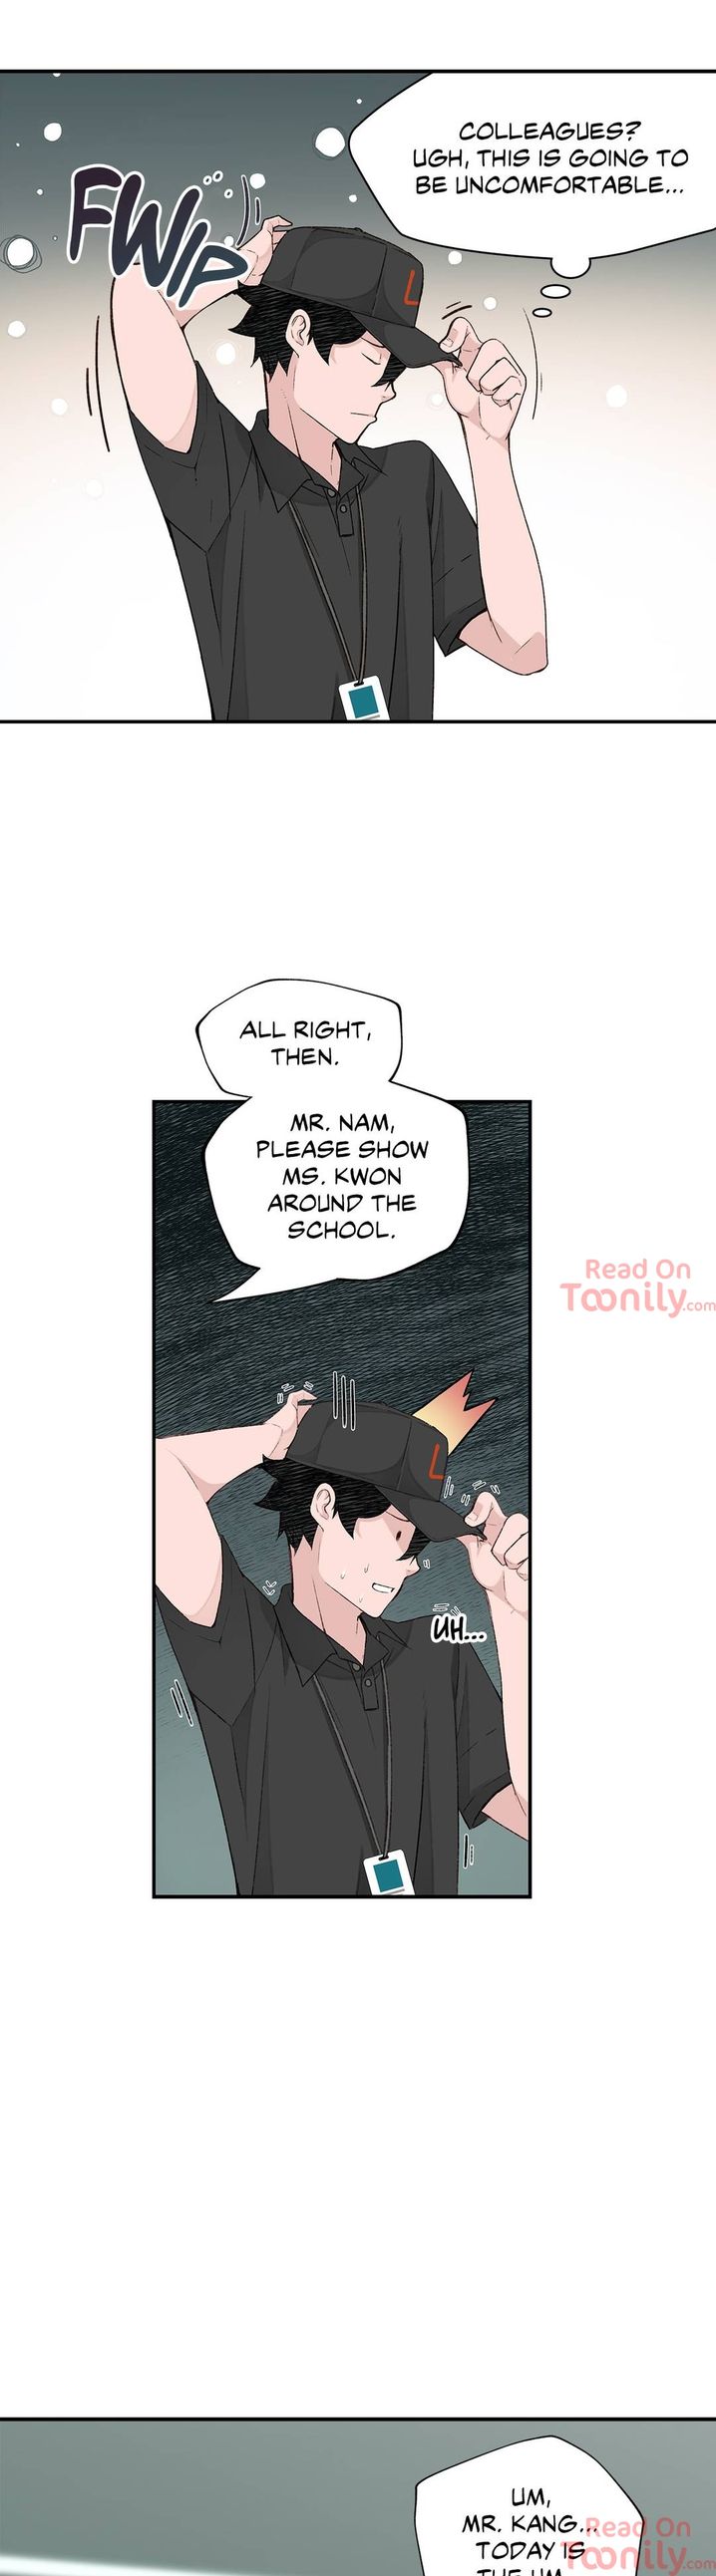 Teach Me How to Please You - Chapter 3 Page 3